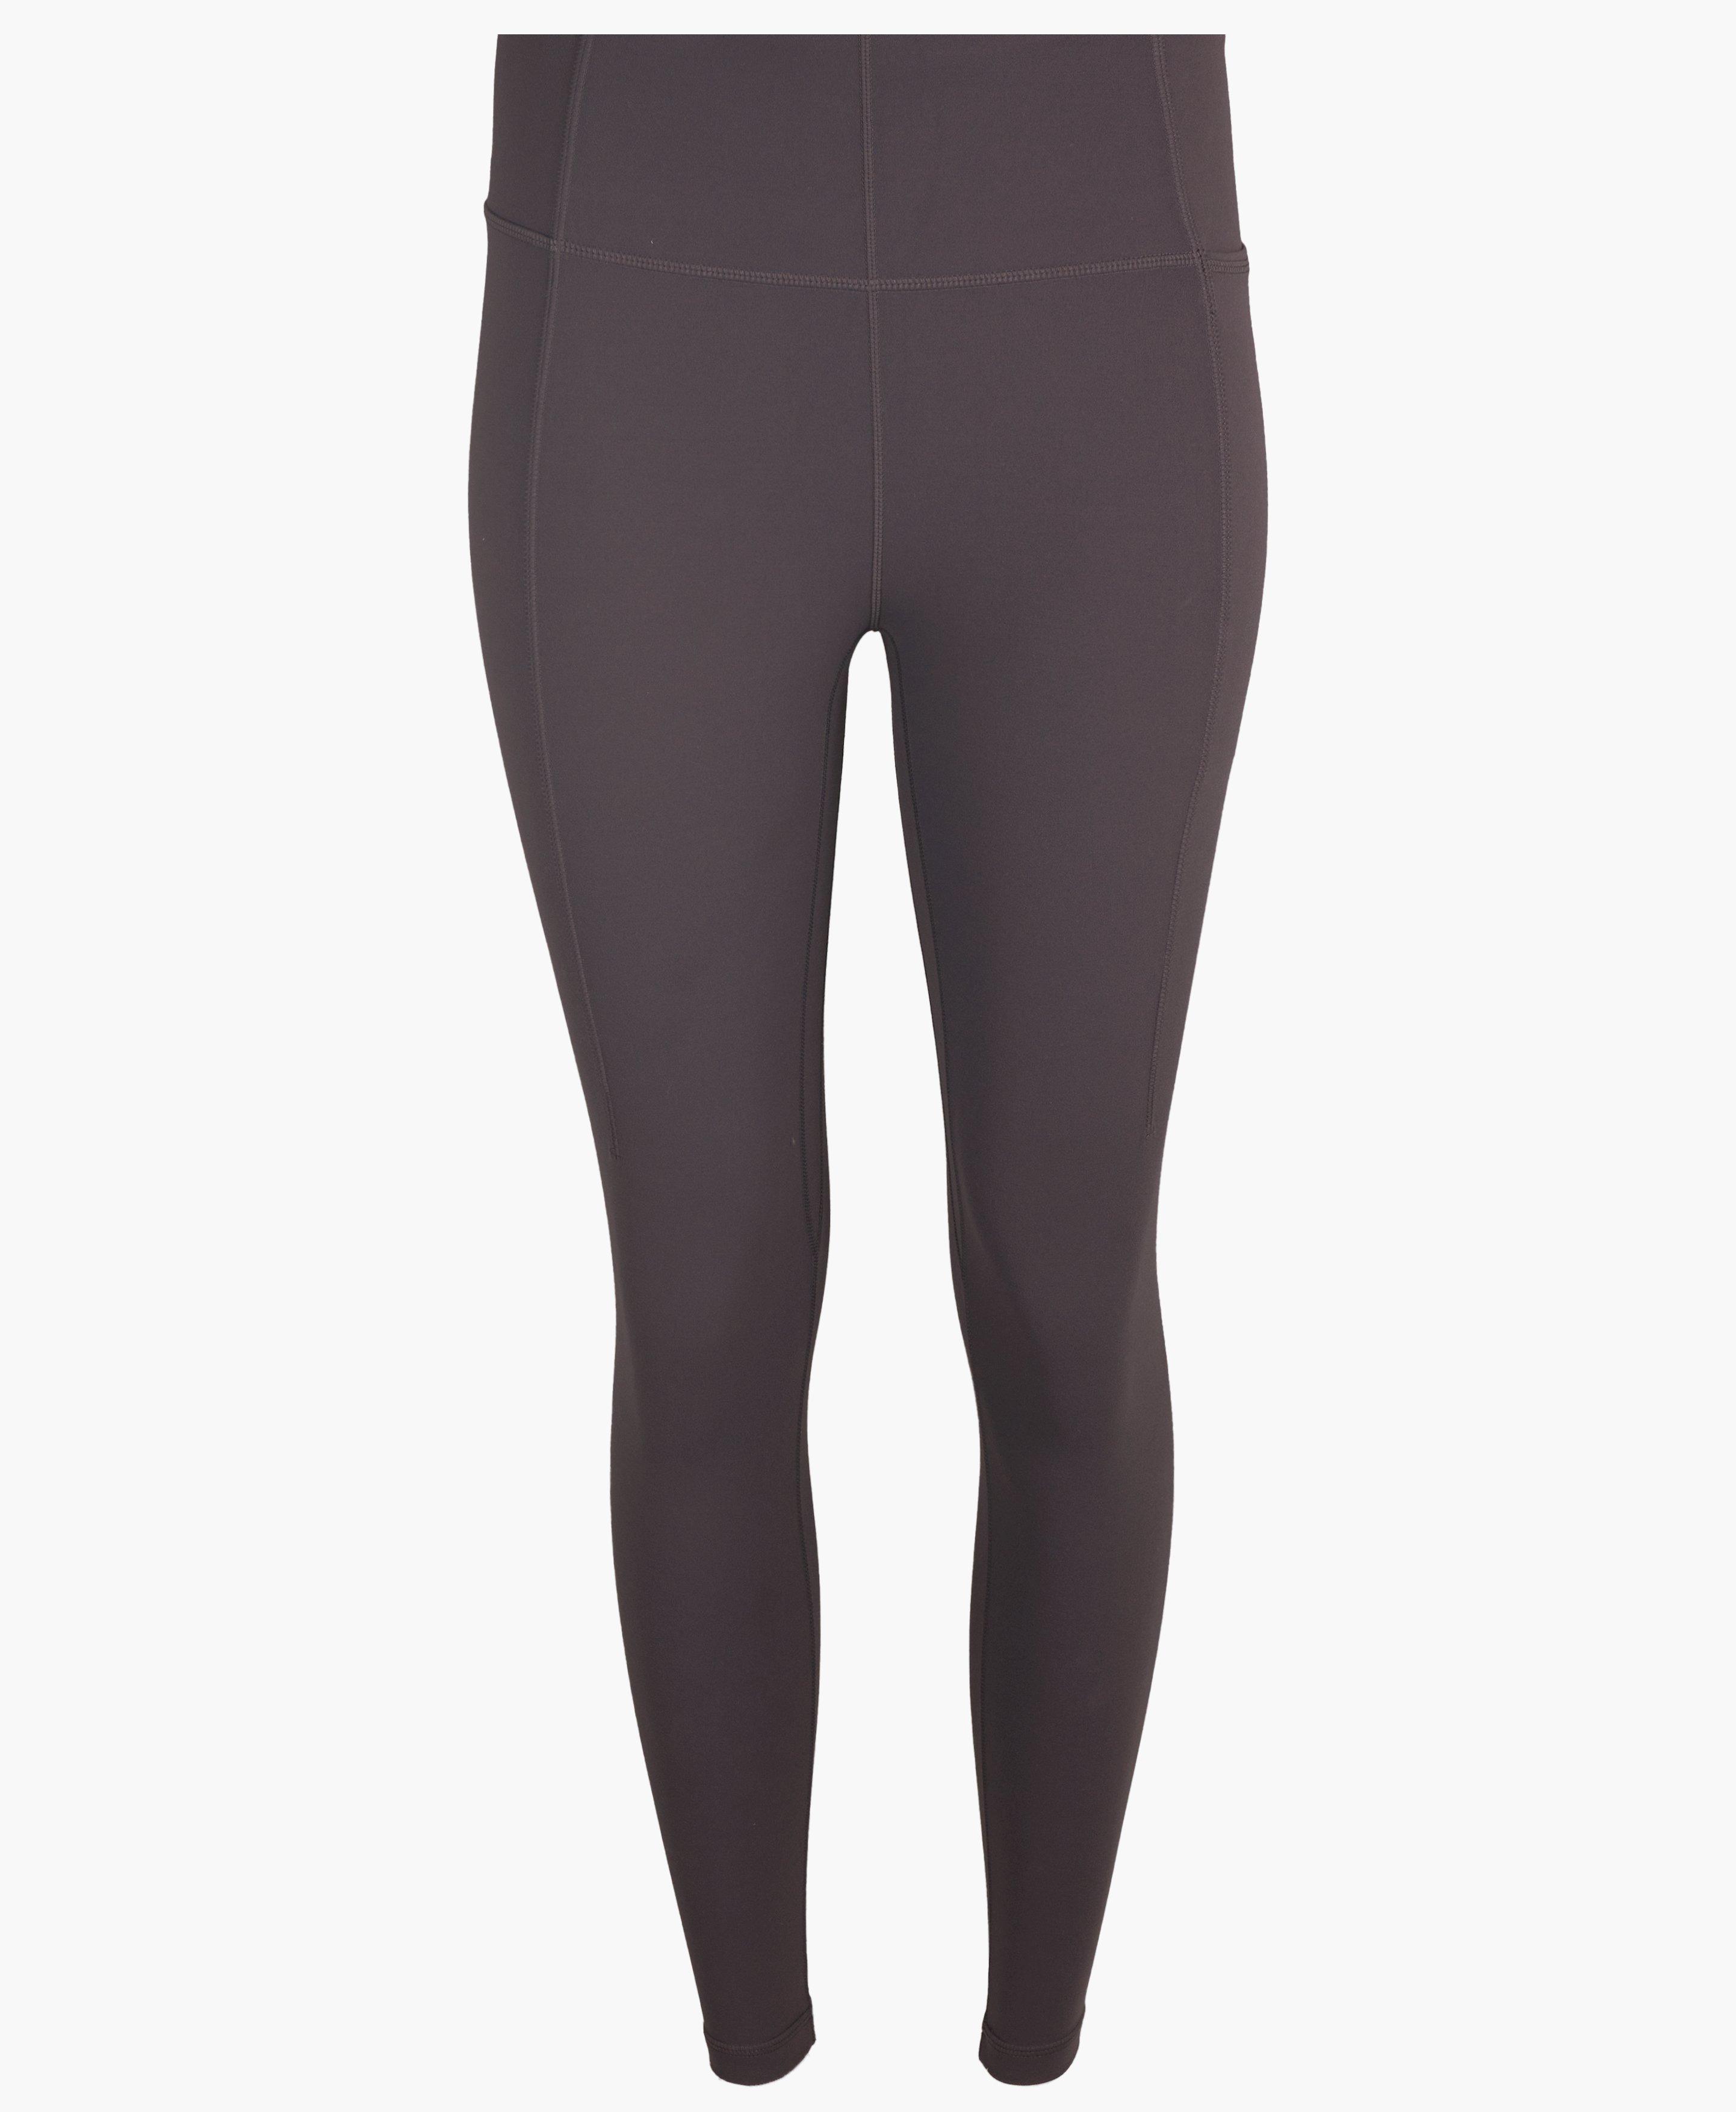 Sweaty Betty Super Soft 7/8 Leggings  Anthropologie Japan - Women's  Clothing, Accessories & Home